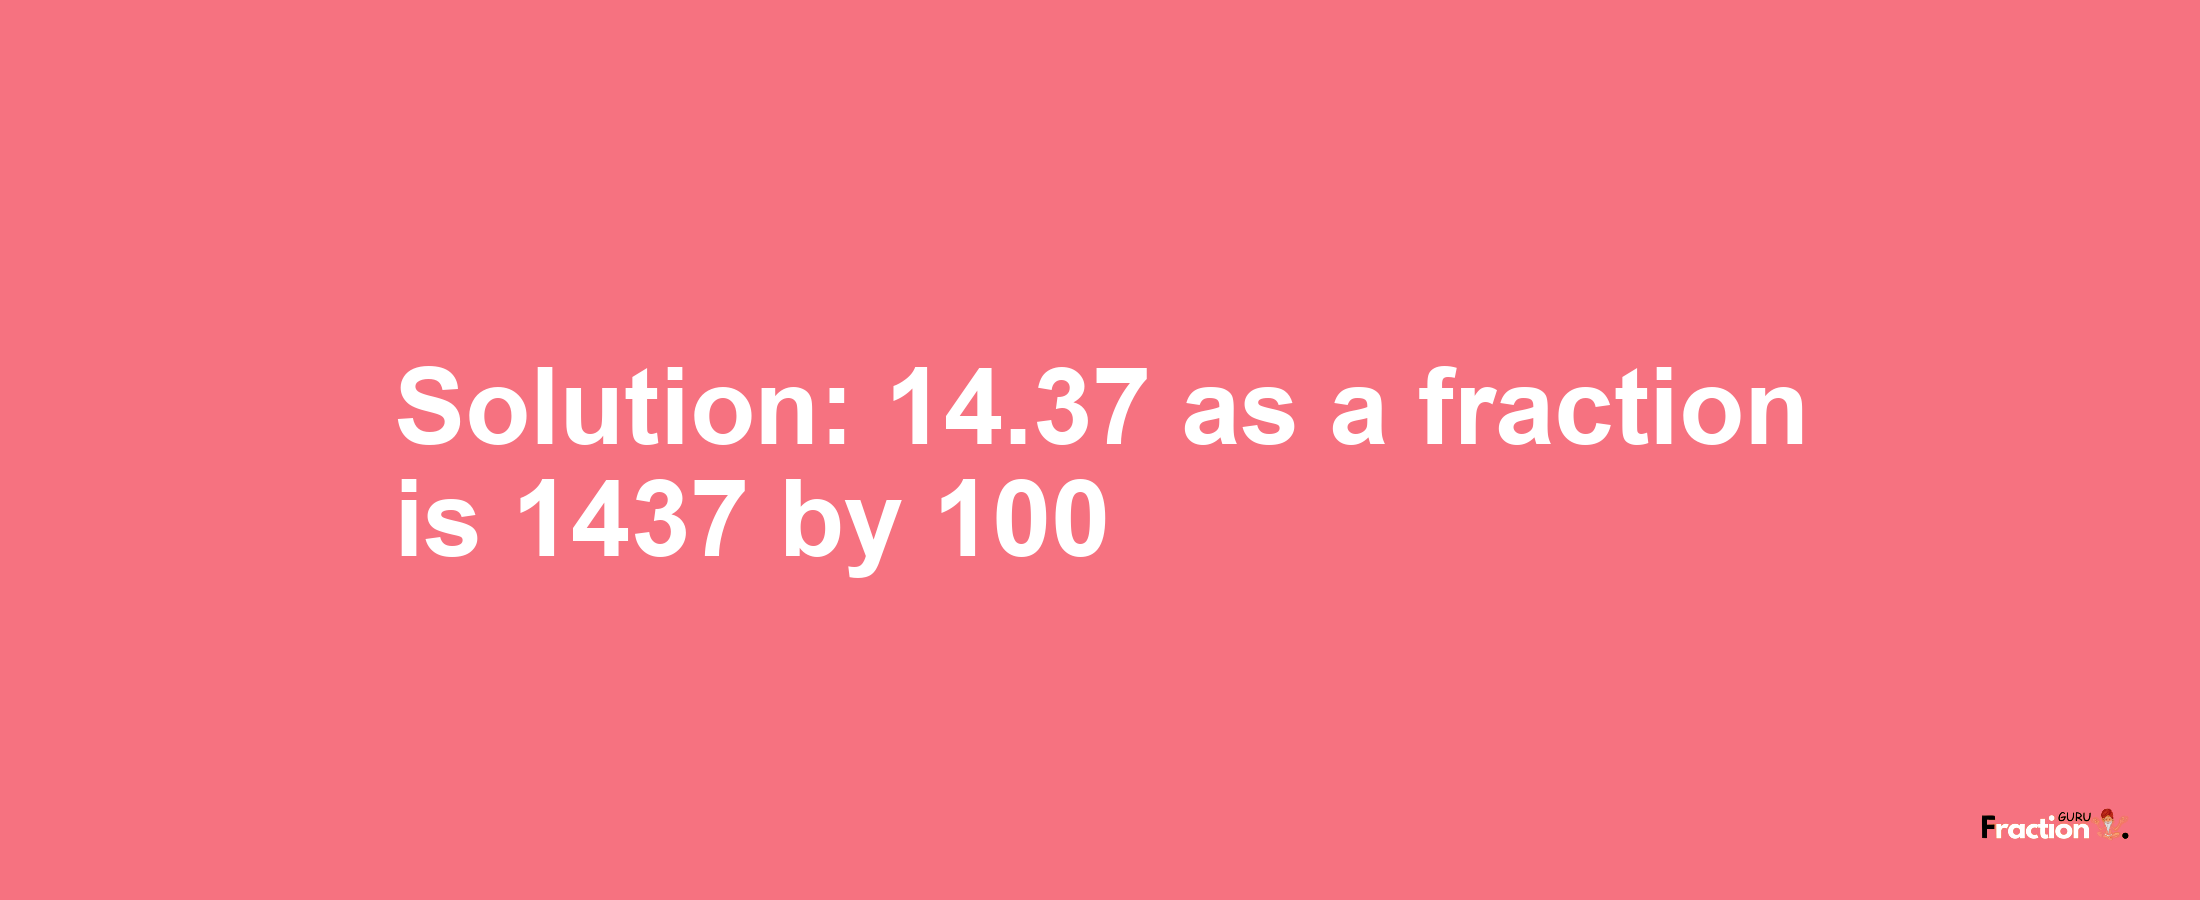 Solution:14.37 as a fraction is 1437/100